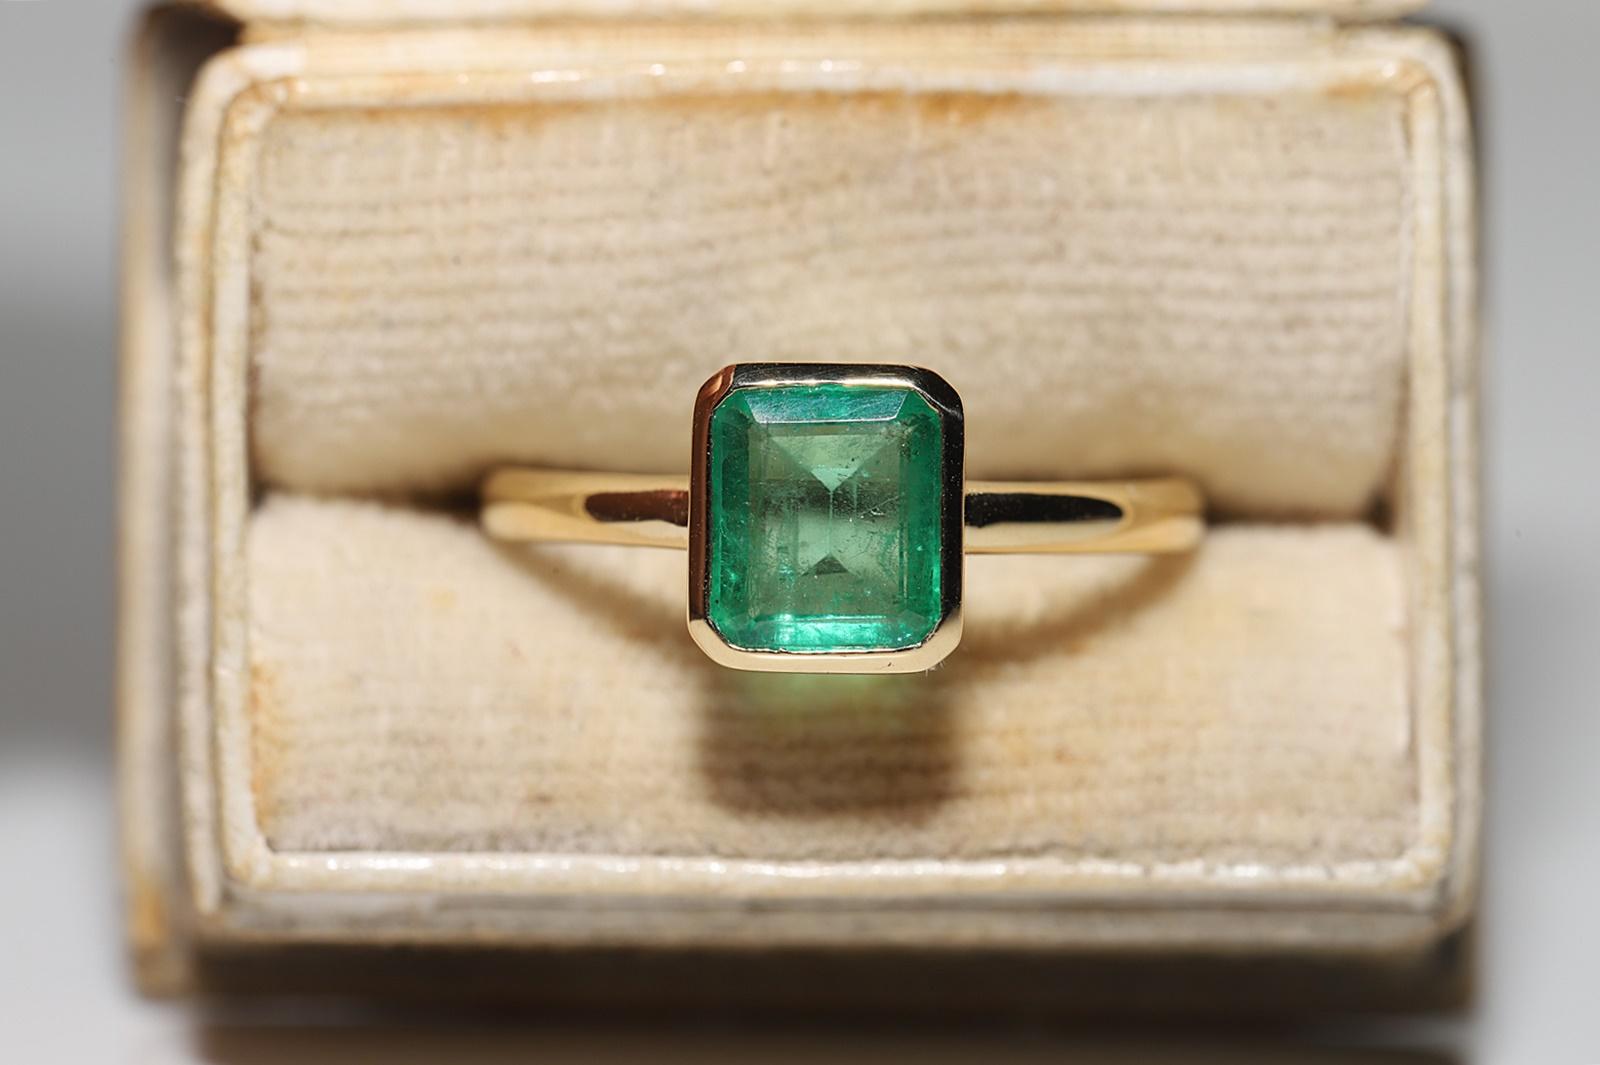 In very good condition.
Total weght is 3.4 grams.
Totally is emerald 1.20 ct.
Ring size is US 6.5 (We offer free resizing)
We can make any size.
Box is not included.
Please contact for any questions.